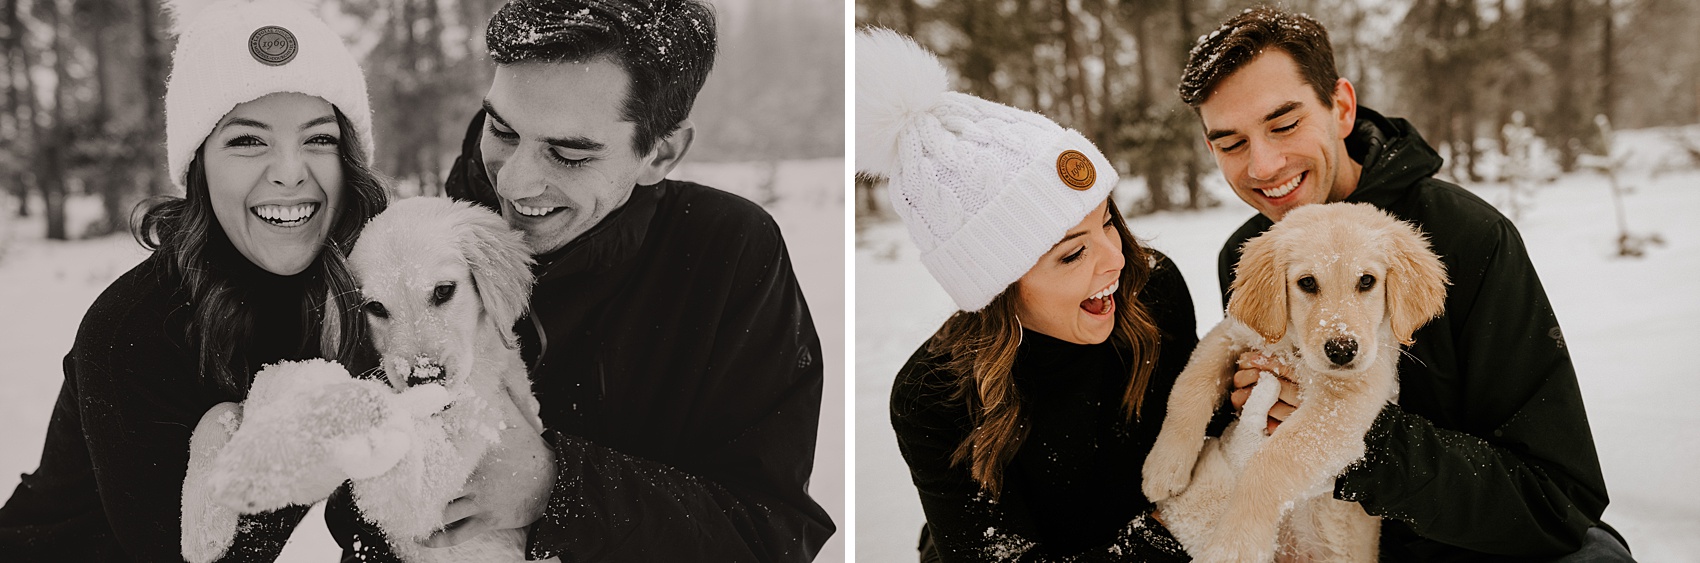 bend engagement session oregon cascade lakes highway wanoga sno park snow winter puppy victoria carlson